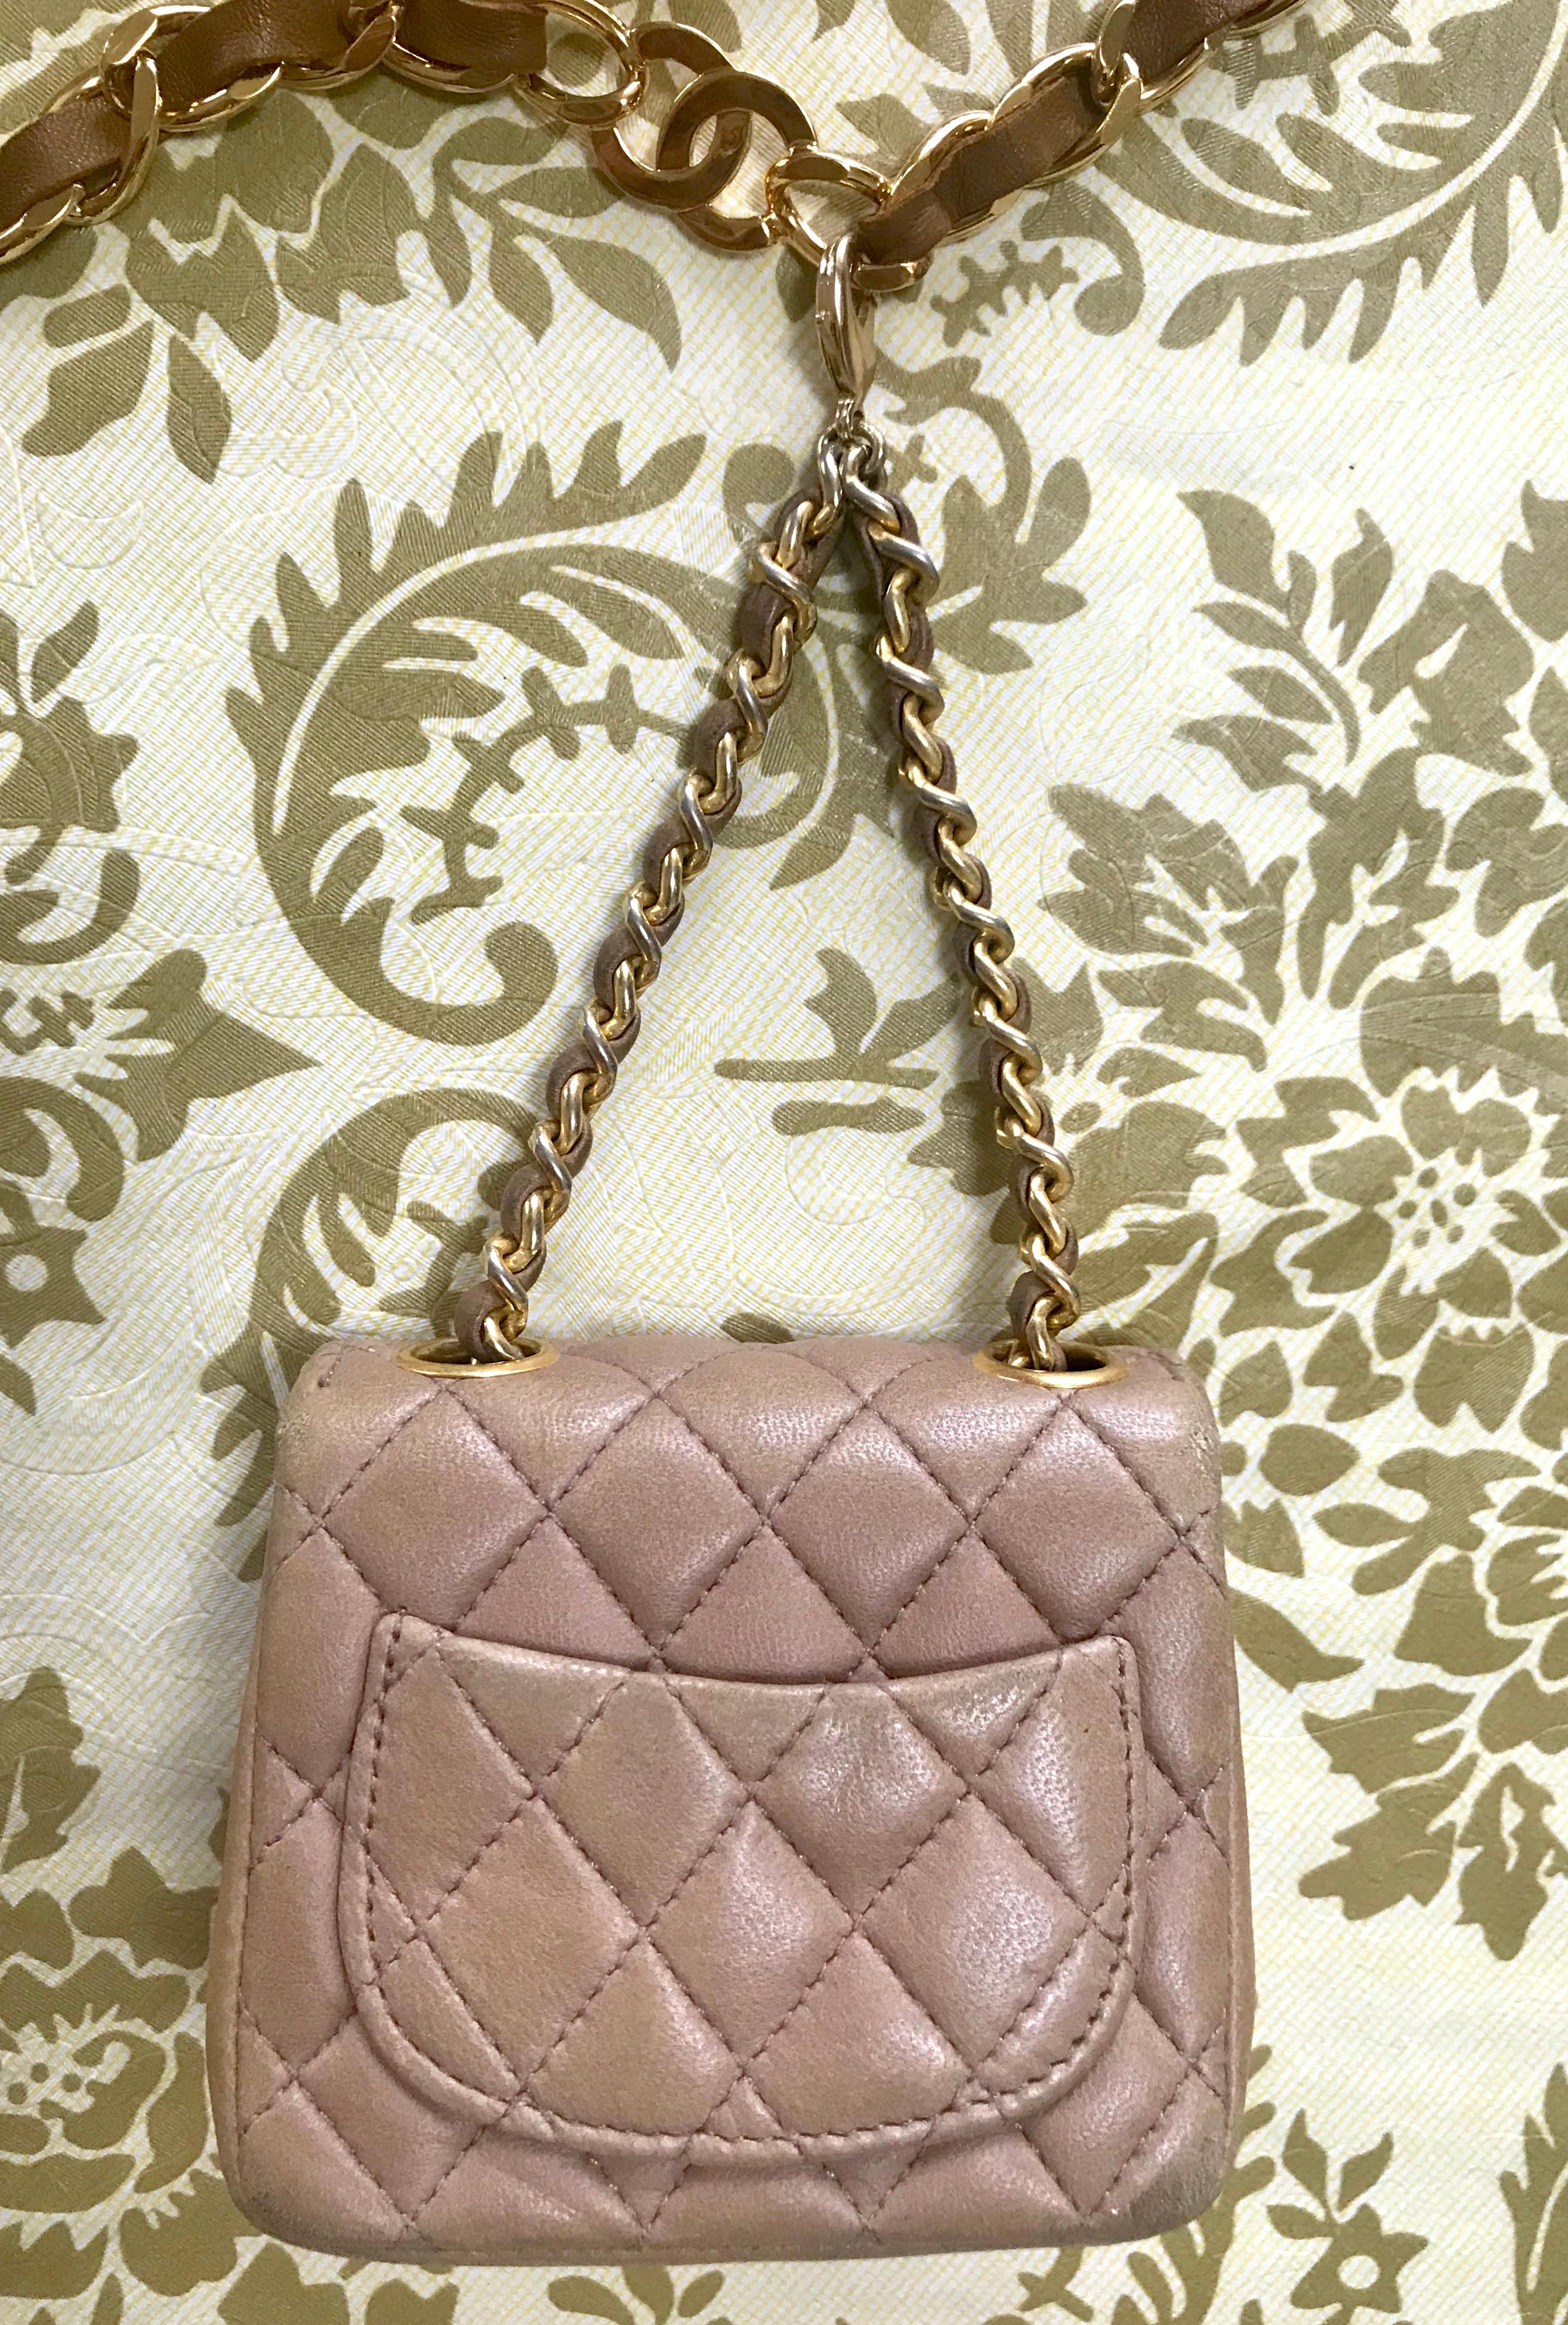 Chanel Vintage brown lambskin mini 2.55 bag charm and golden chain belt with CC For Sale 3